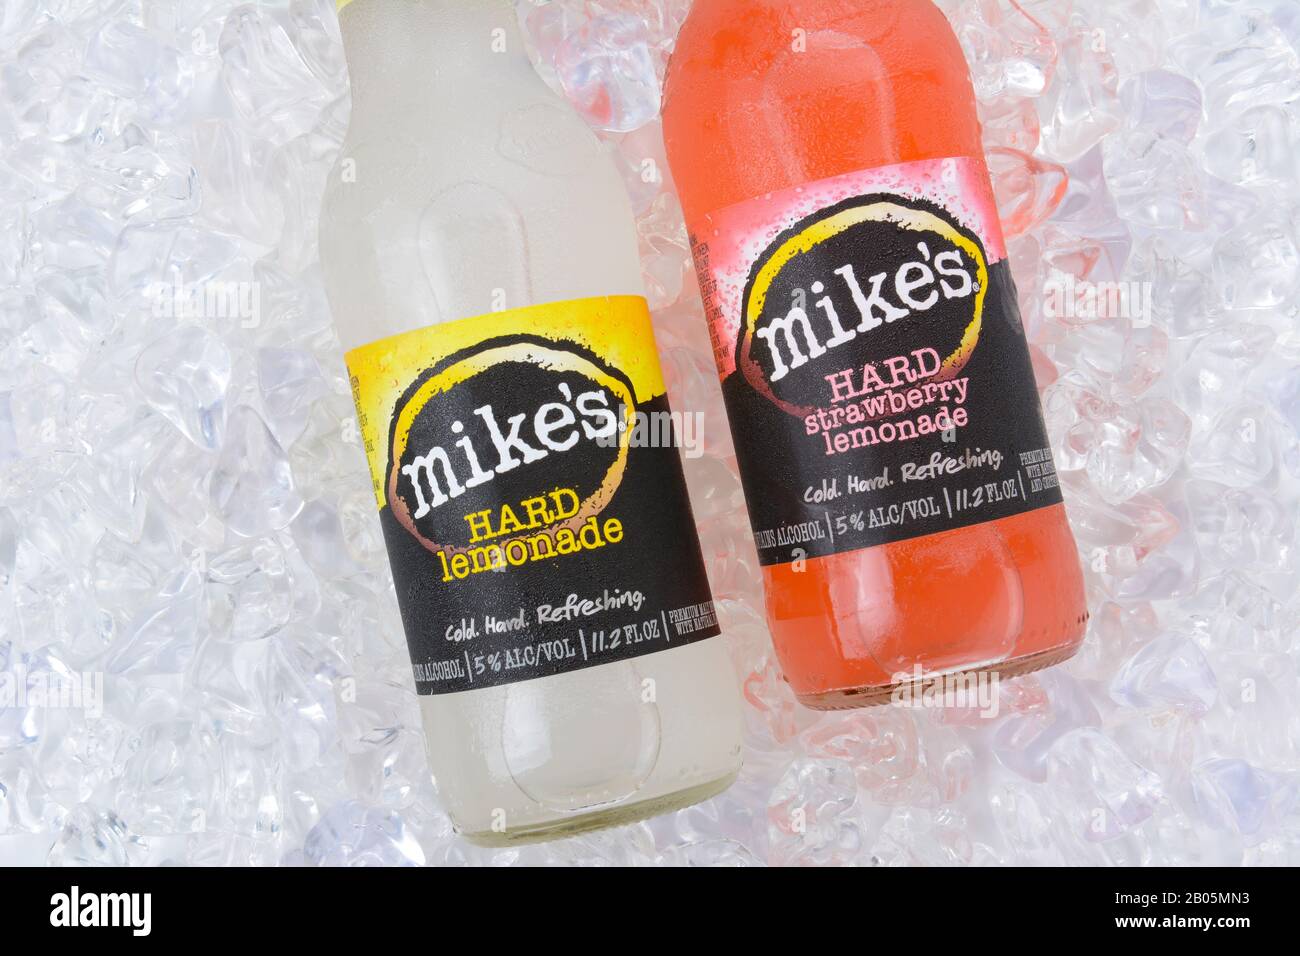 IRVINE, CA - AUGUST 15, 2016: Two bottles of Mikes Hard Lemonade on ice. Mikes produces a line of alcoholic lemonades in various fruit flavors. Stock Photo